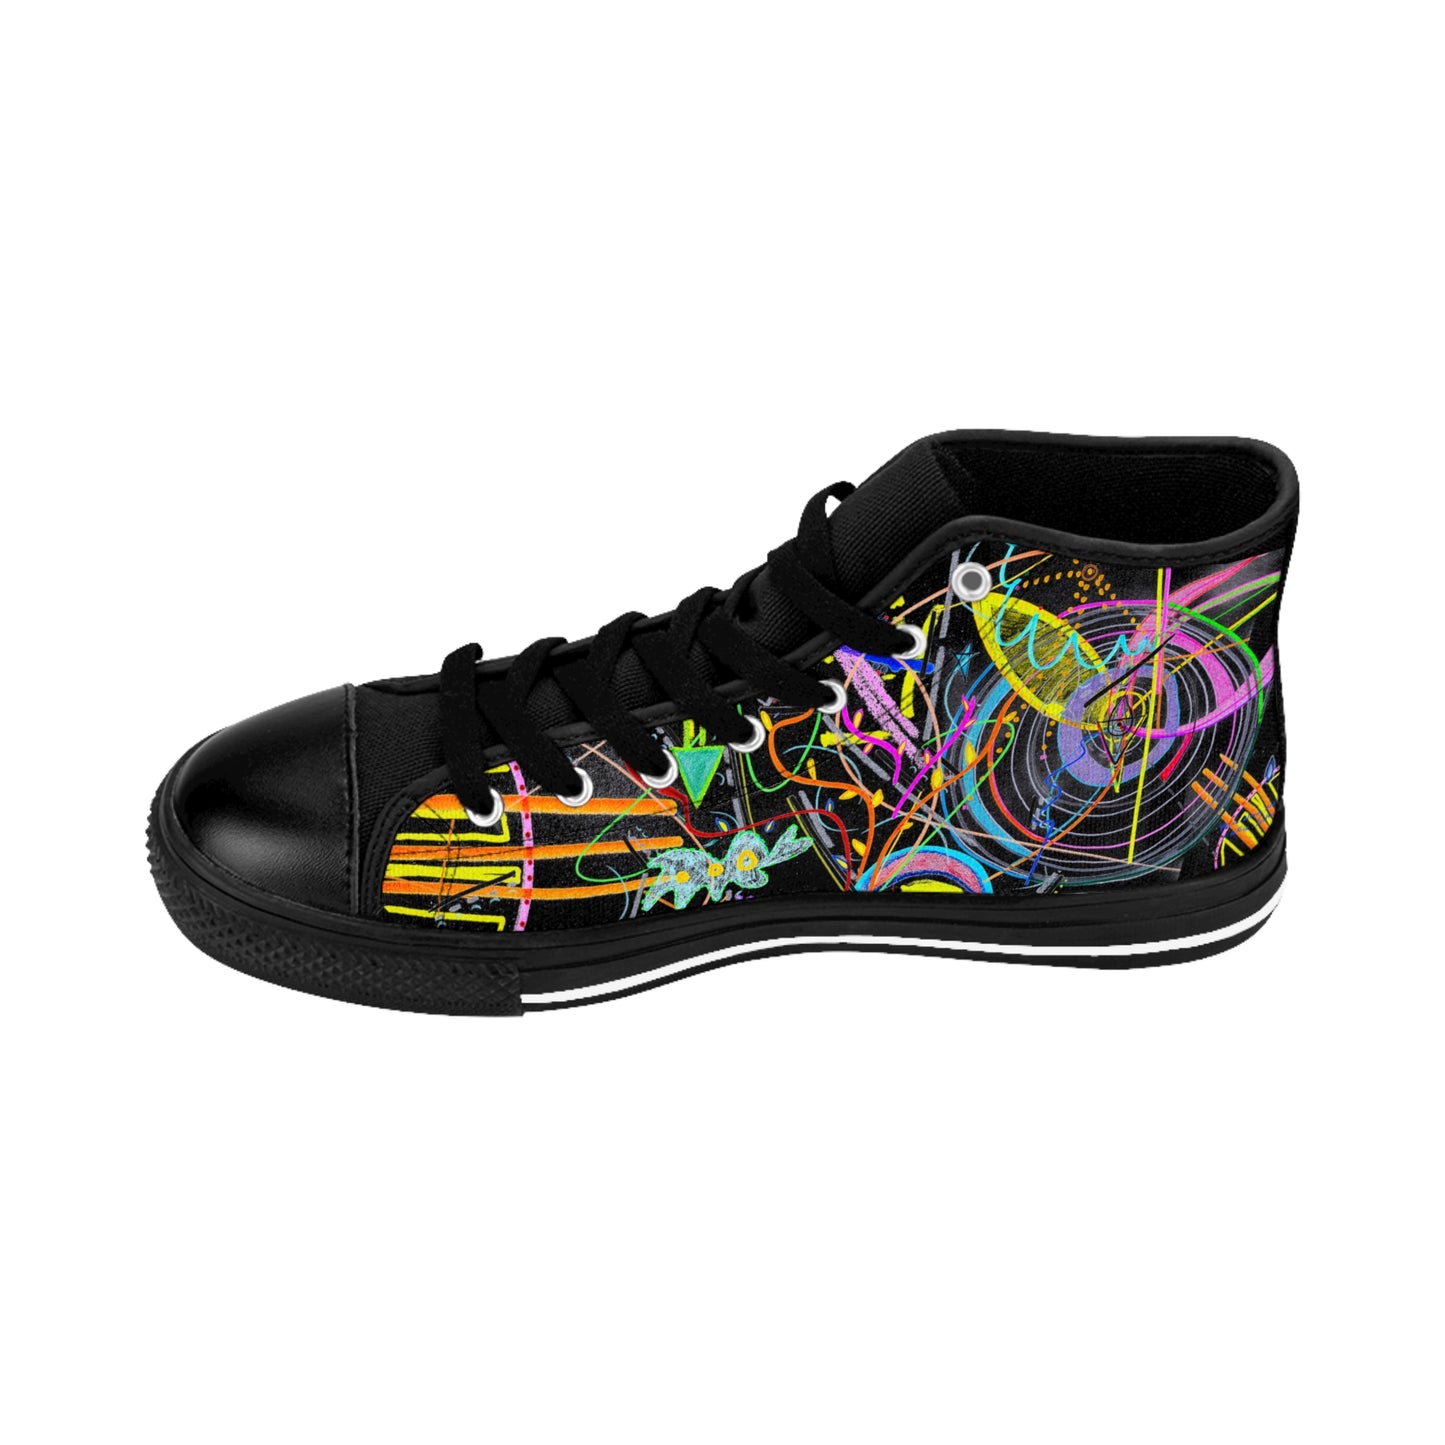 Welcome to the Motherboard. Dance your celebration. masculine high-top sneakers